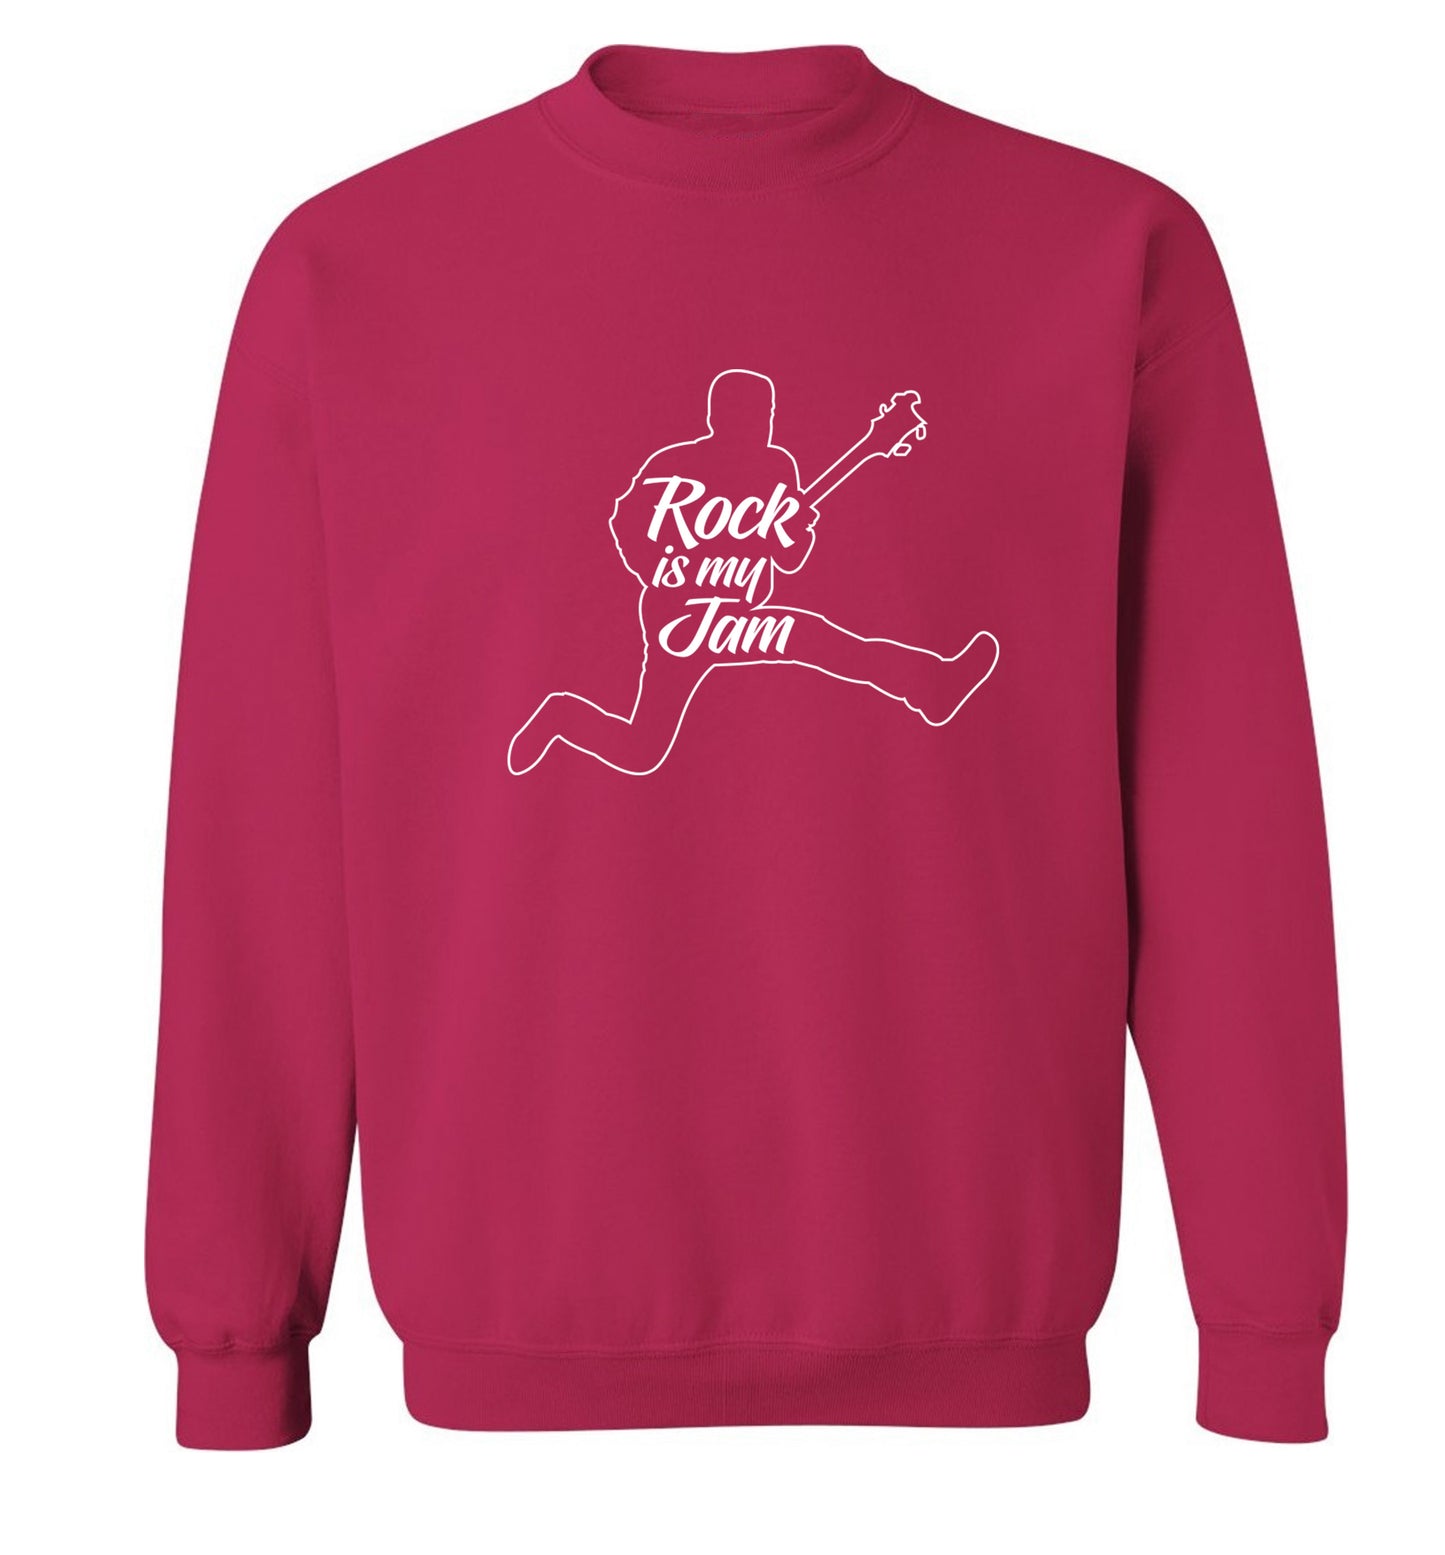 Rock is my jam Adult's unisex pink Sweater 2XL